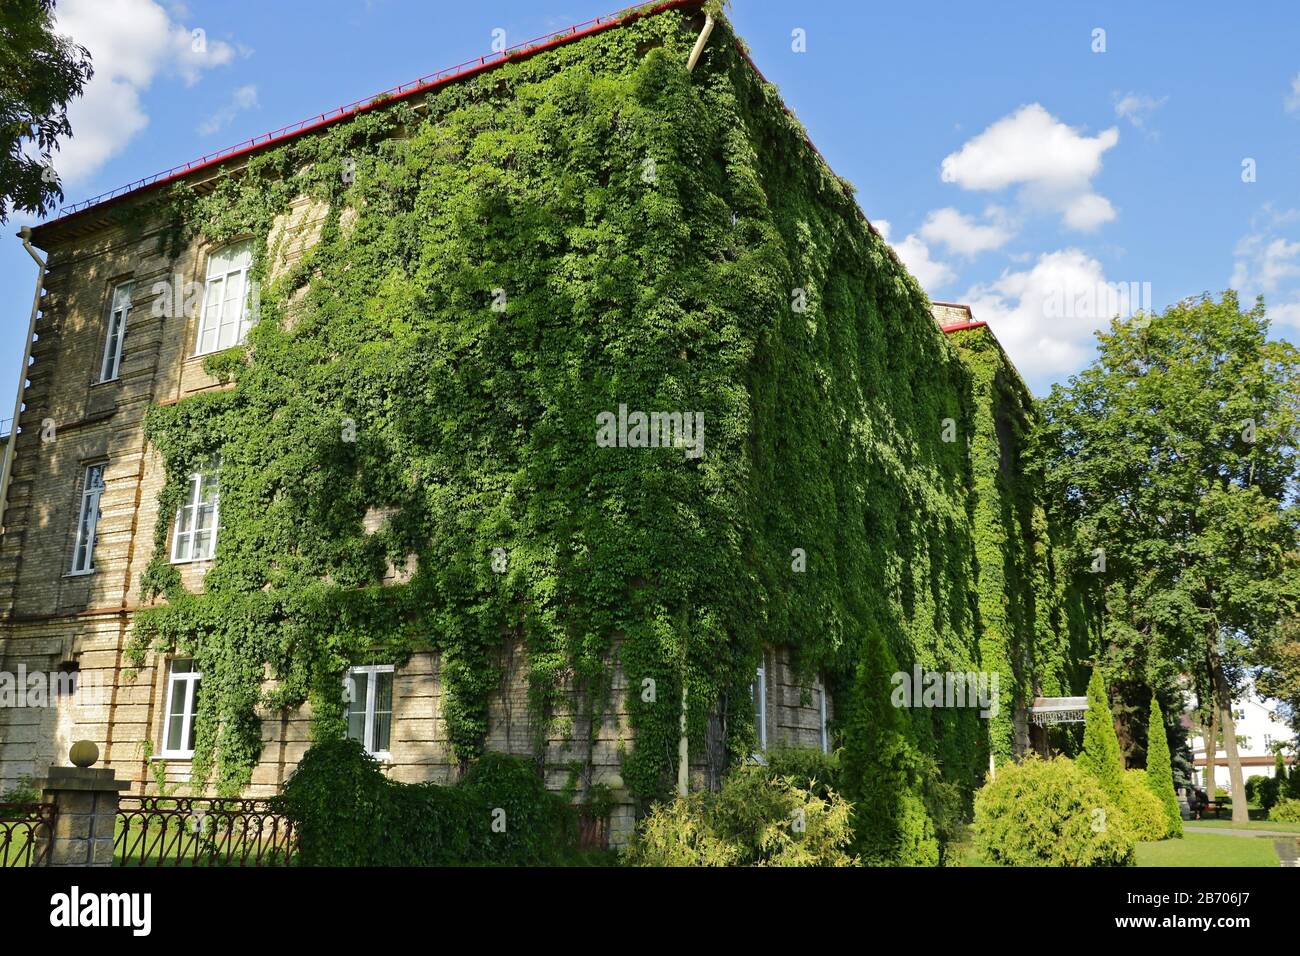 Grodno, Belarus - May 18, 2019: Old building covered with greenery Stock Photo